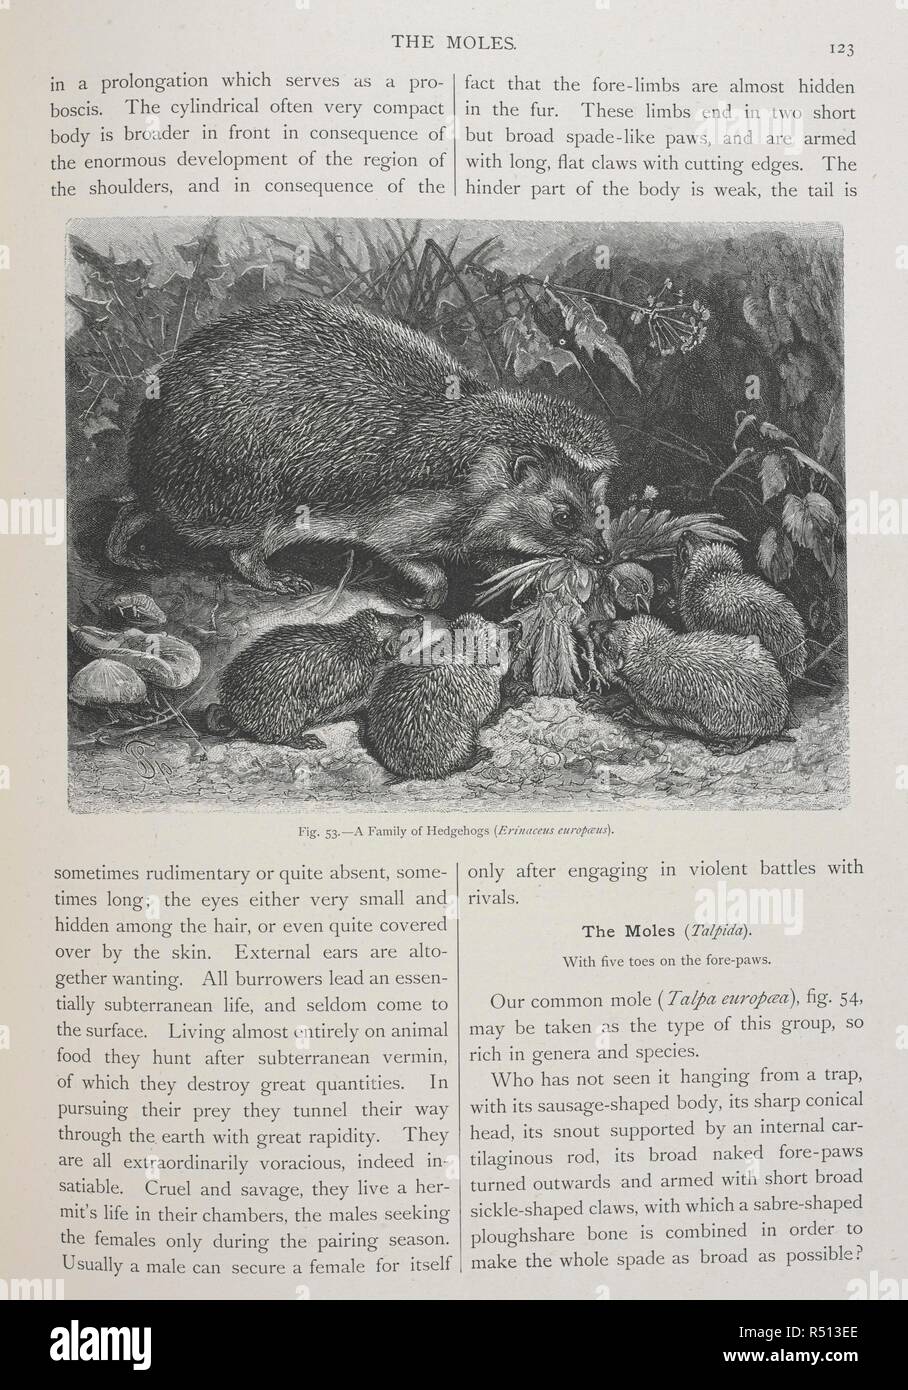 A family of Hedgehogs. The Geographical Distribution of Animals, with a study of the relations of living and extinct faunas as elucidating the past changes of the earth's surface. ... . London, 1876. Source: 07209.dd.1 page 123 Fig.53. Author: WALLACE, ALFRED RUSSEL. Stock Photo